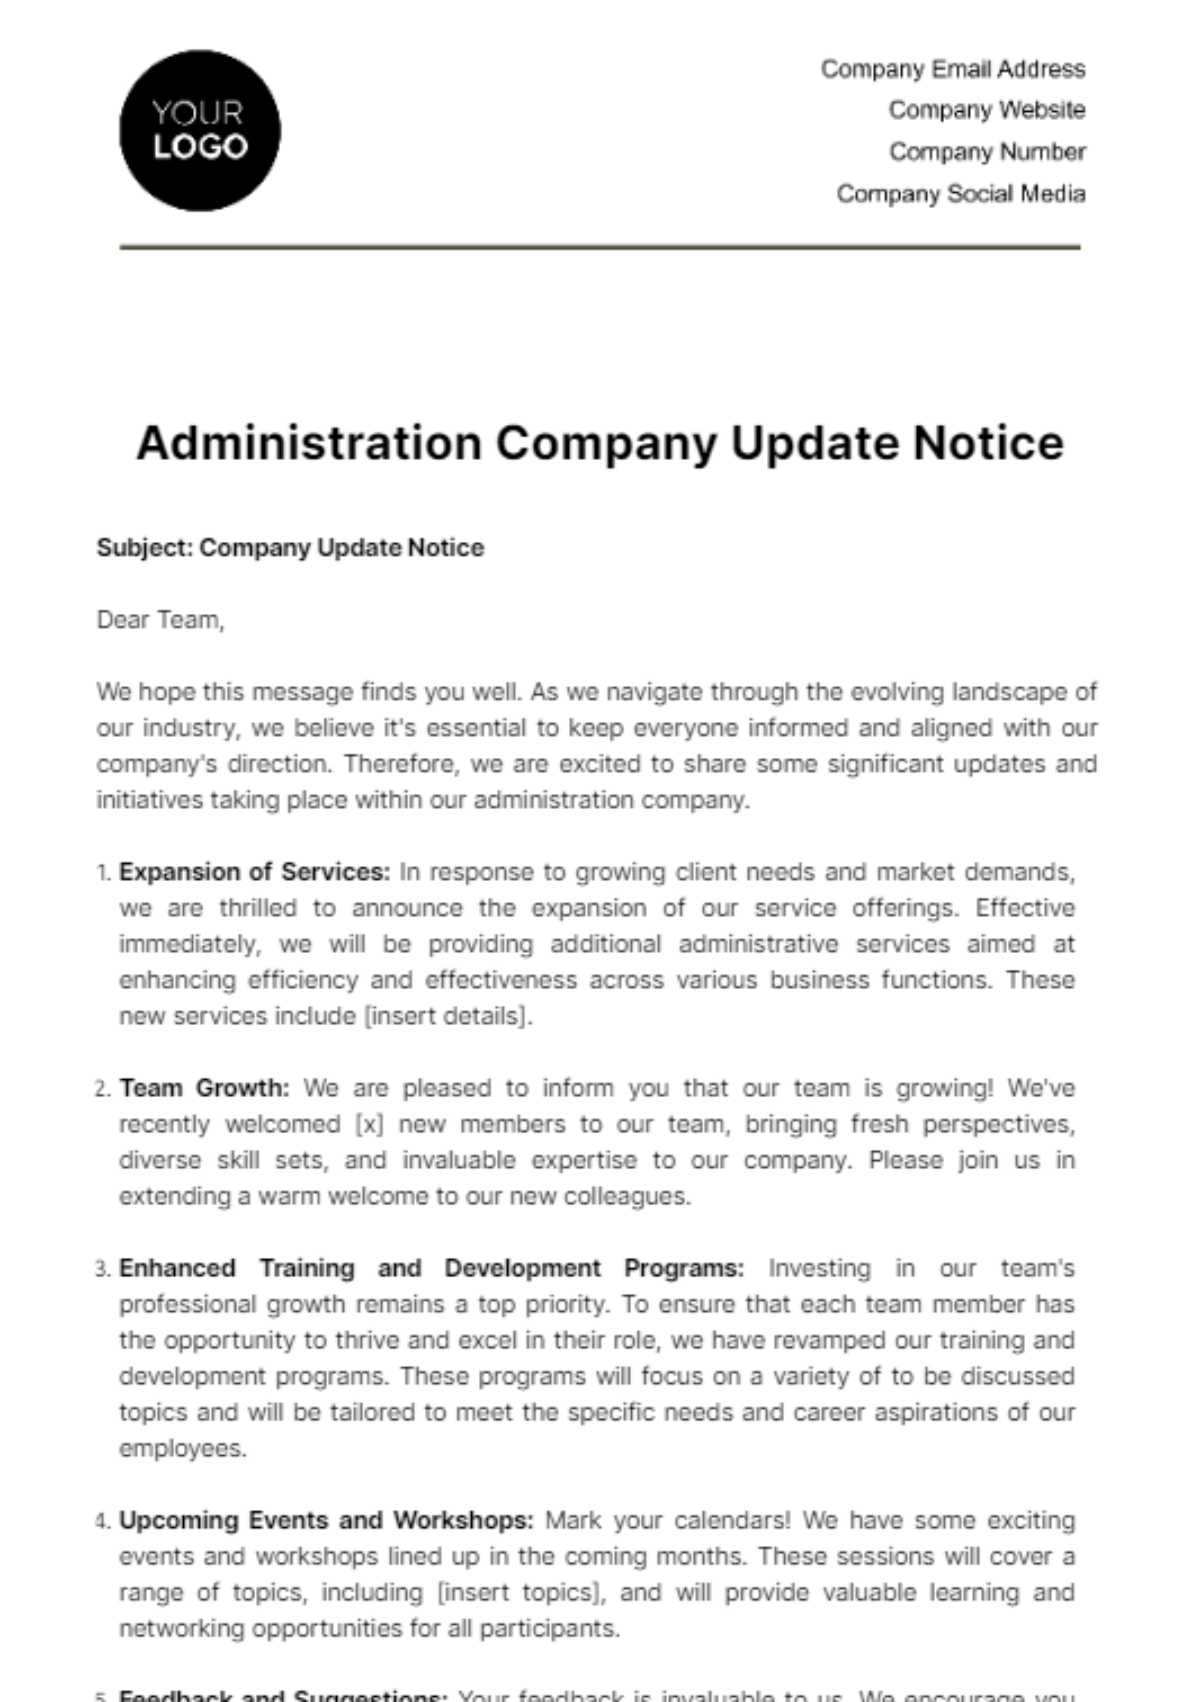 Administration Company Update Notice Template